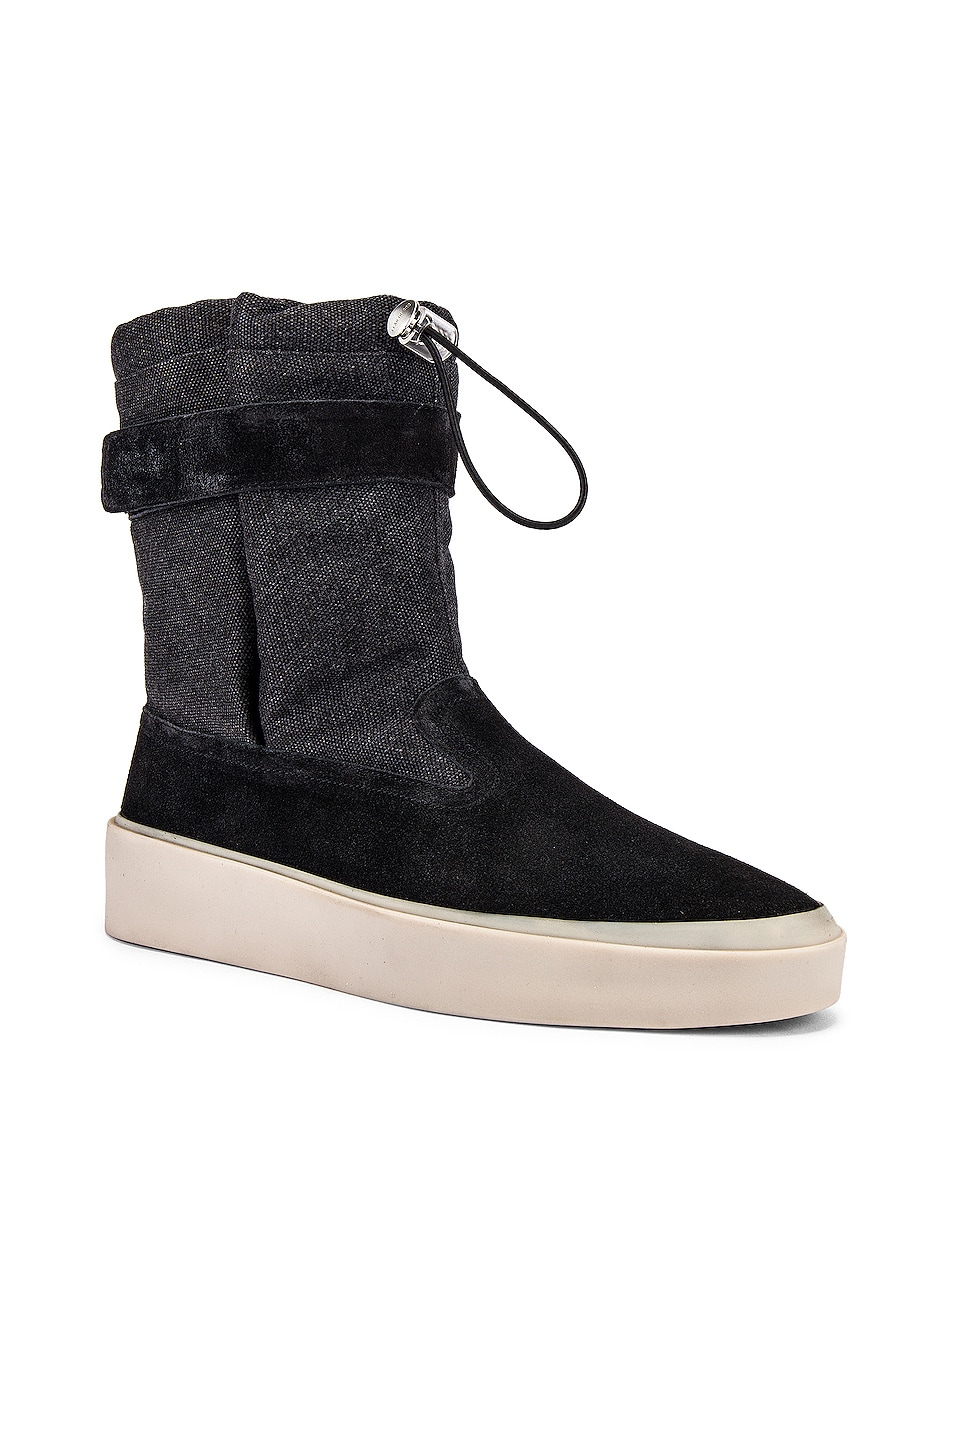 Image 1 of Fear of God Ski Lounge Boot in Black & Grey Gum Sole